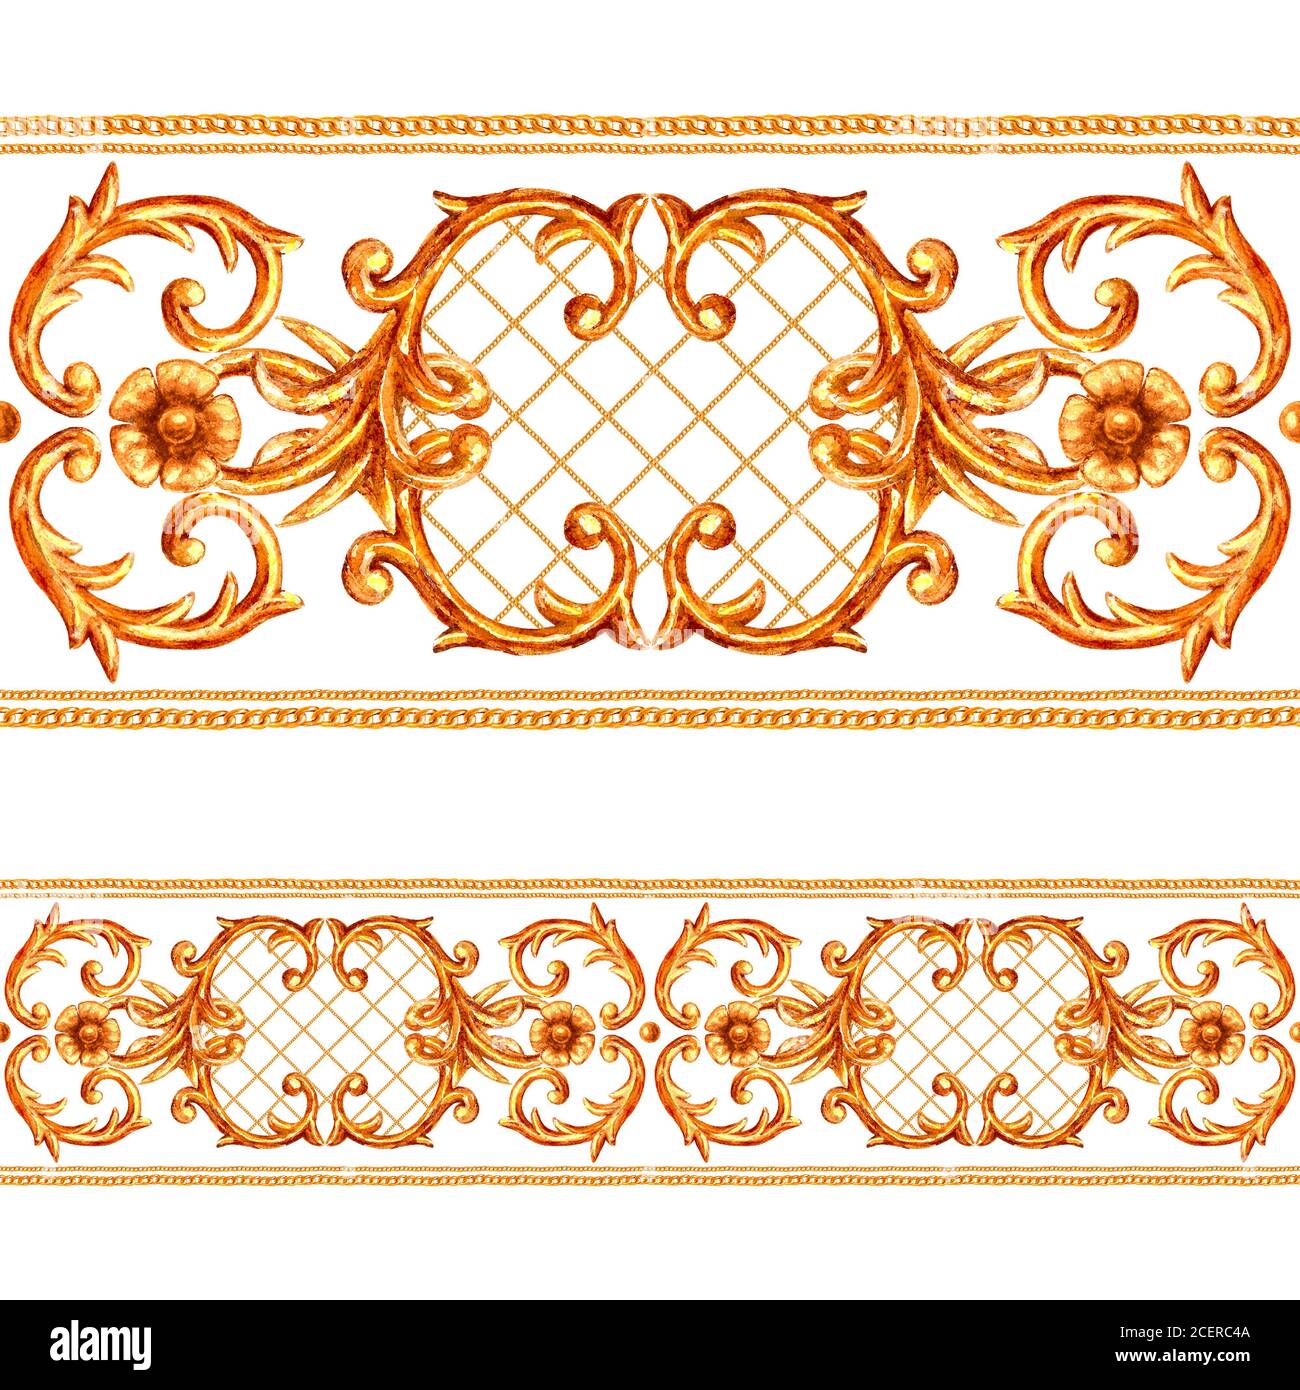 Baroque style golden ornamental segments seamless pattern. Watercolor hand drawn gold border frame with scrolls, leaves, chains and elements on white Stock Photo